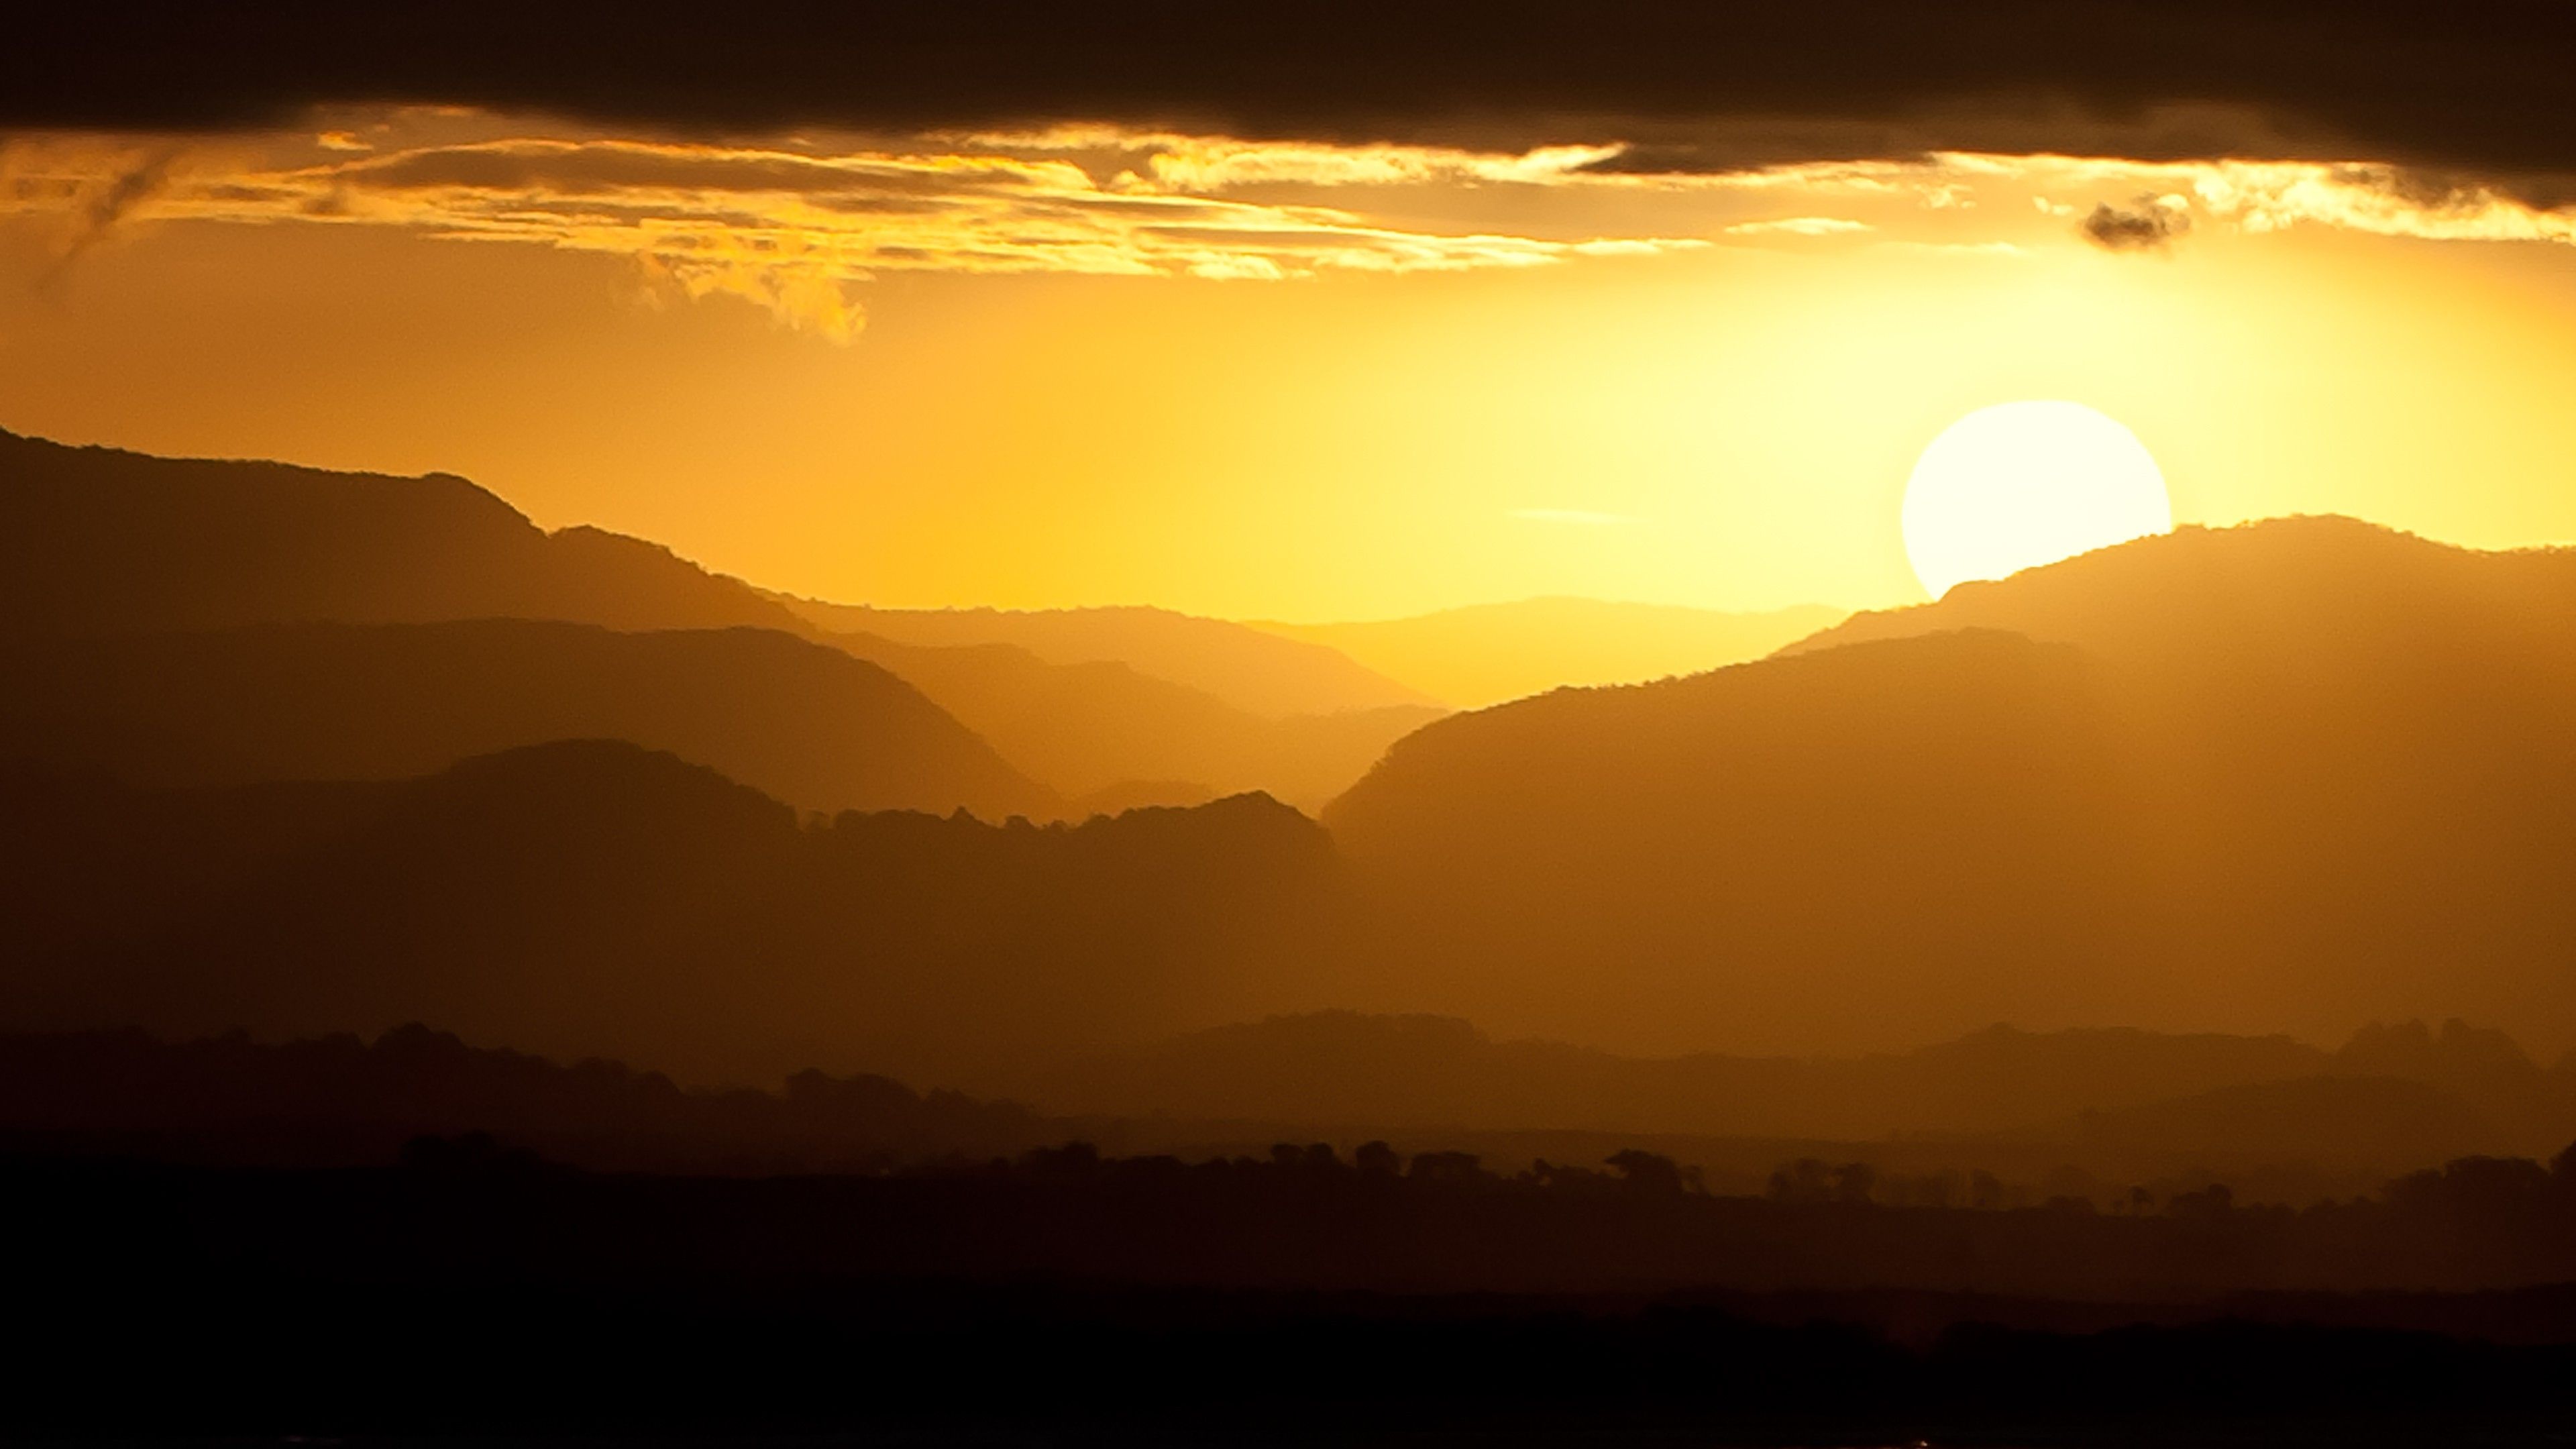 Sunset 4K Wallpaper, Landscape, Mountains, Yellow sky, Silhouette, Nature